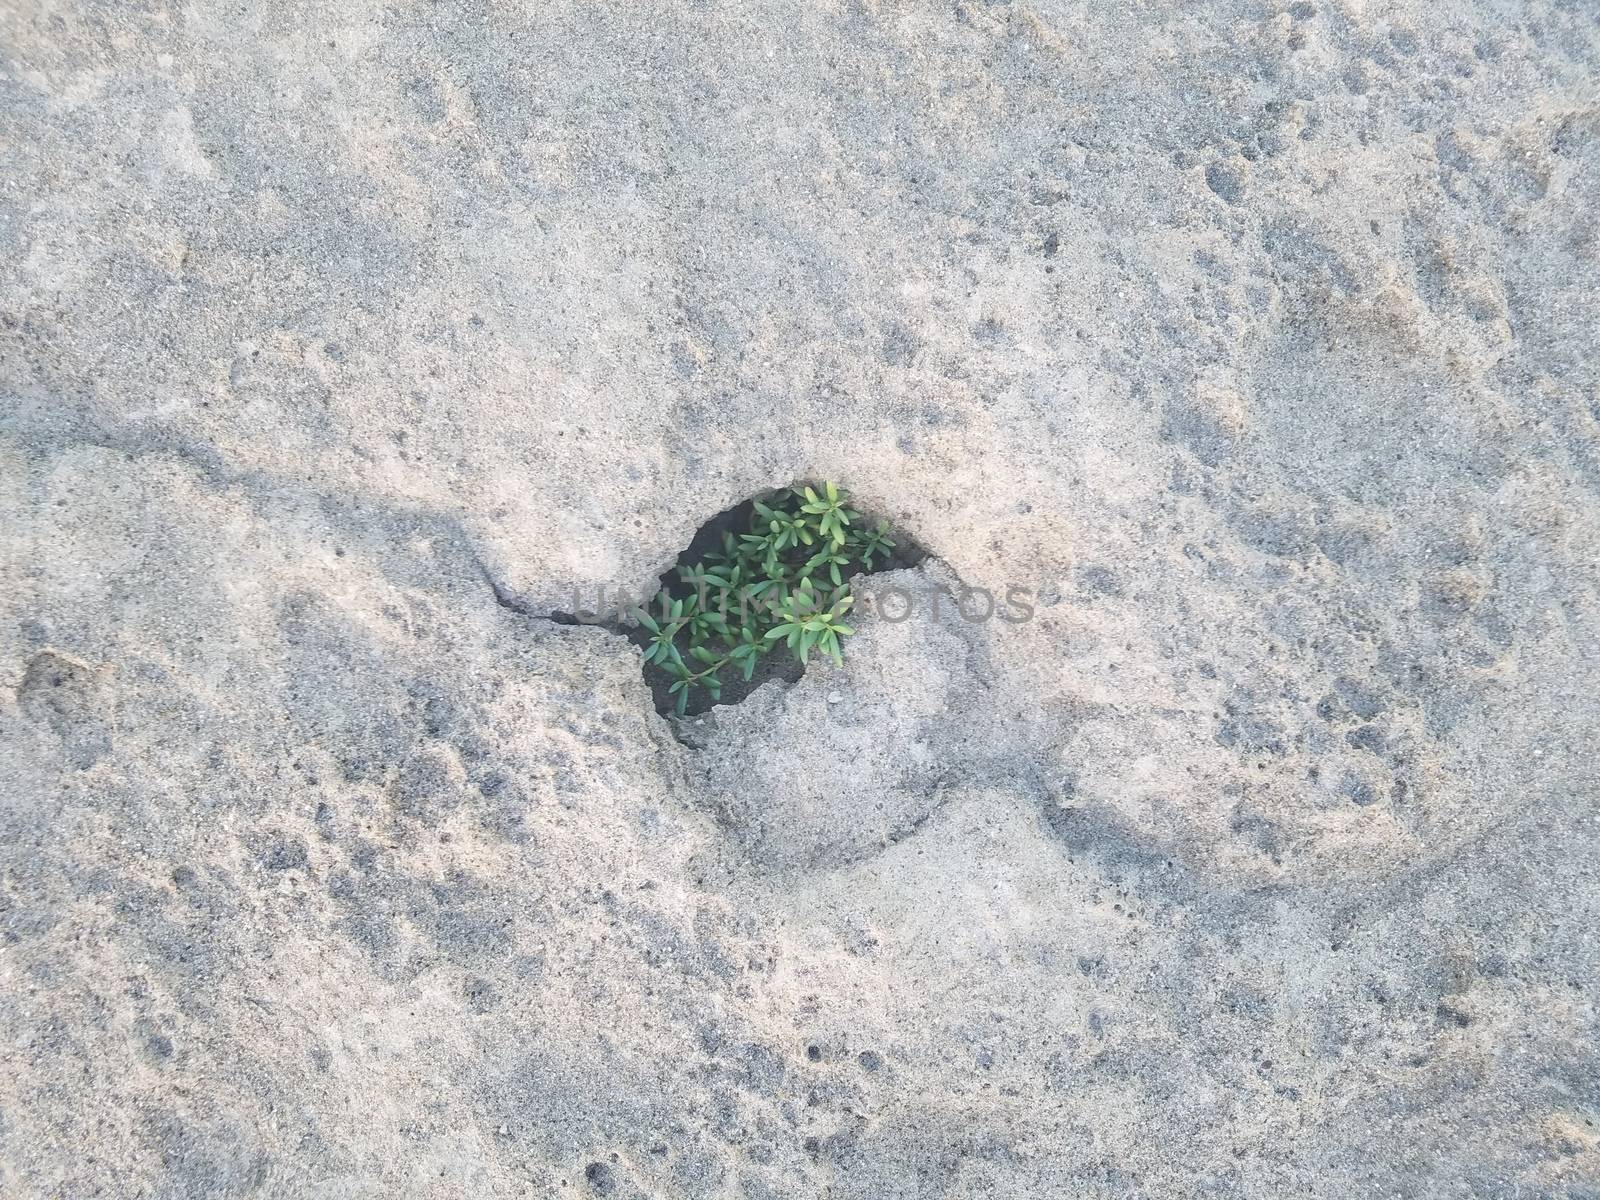 green plant growing in hole in rock at beach in Isabela, Puerto Rico by stockphotofan1